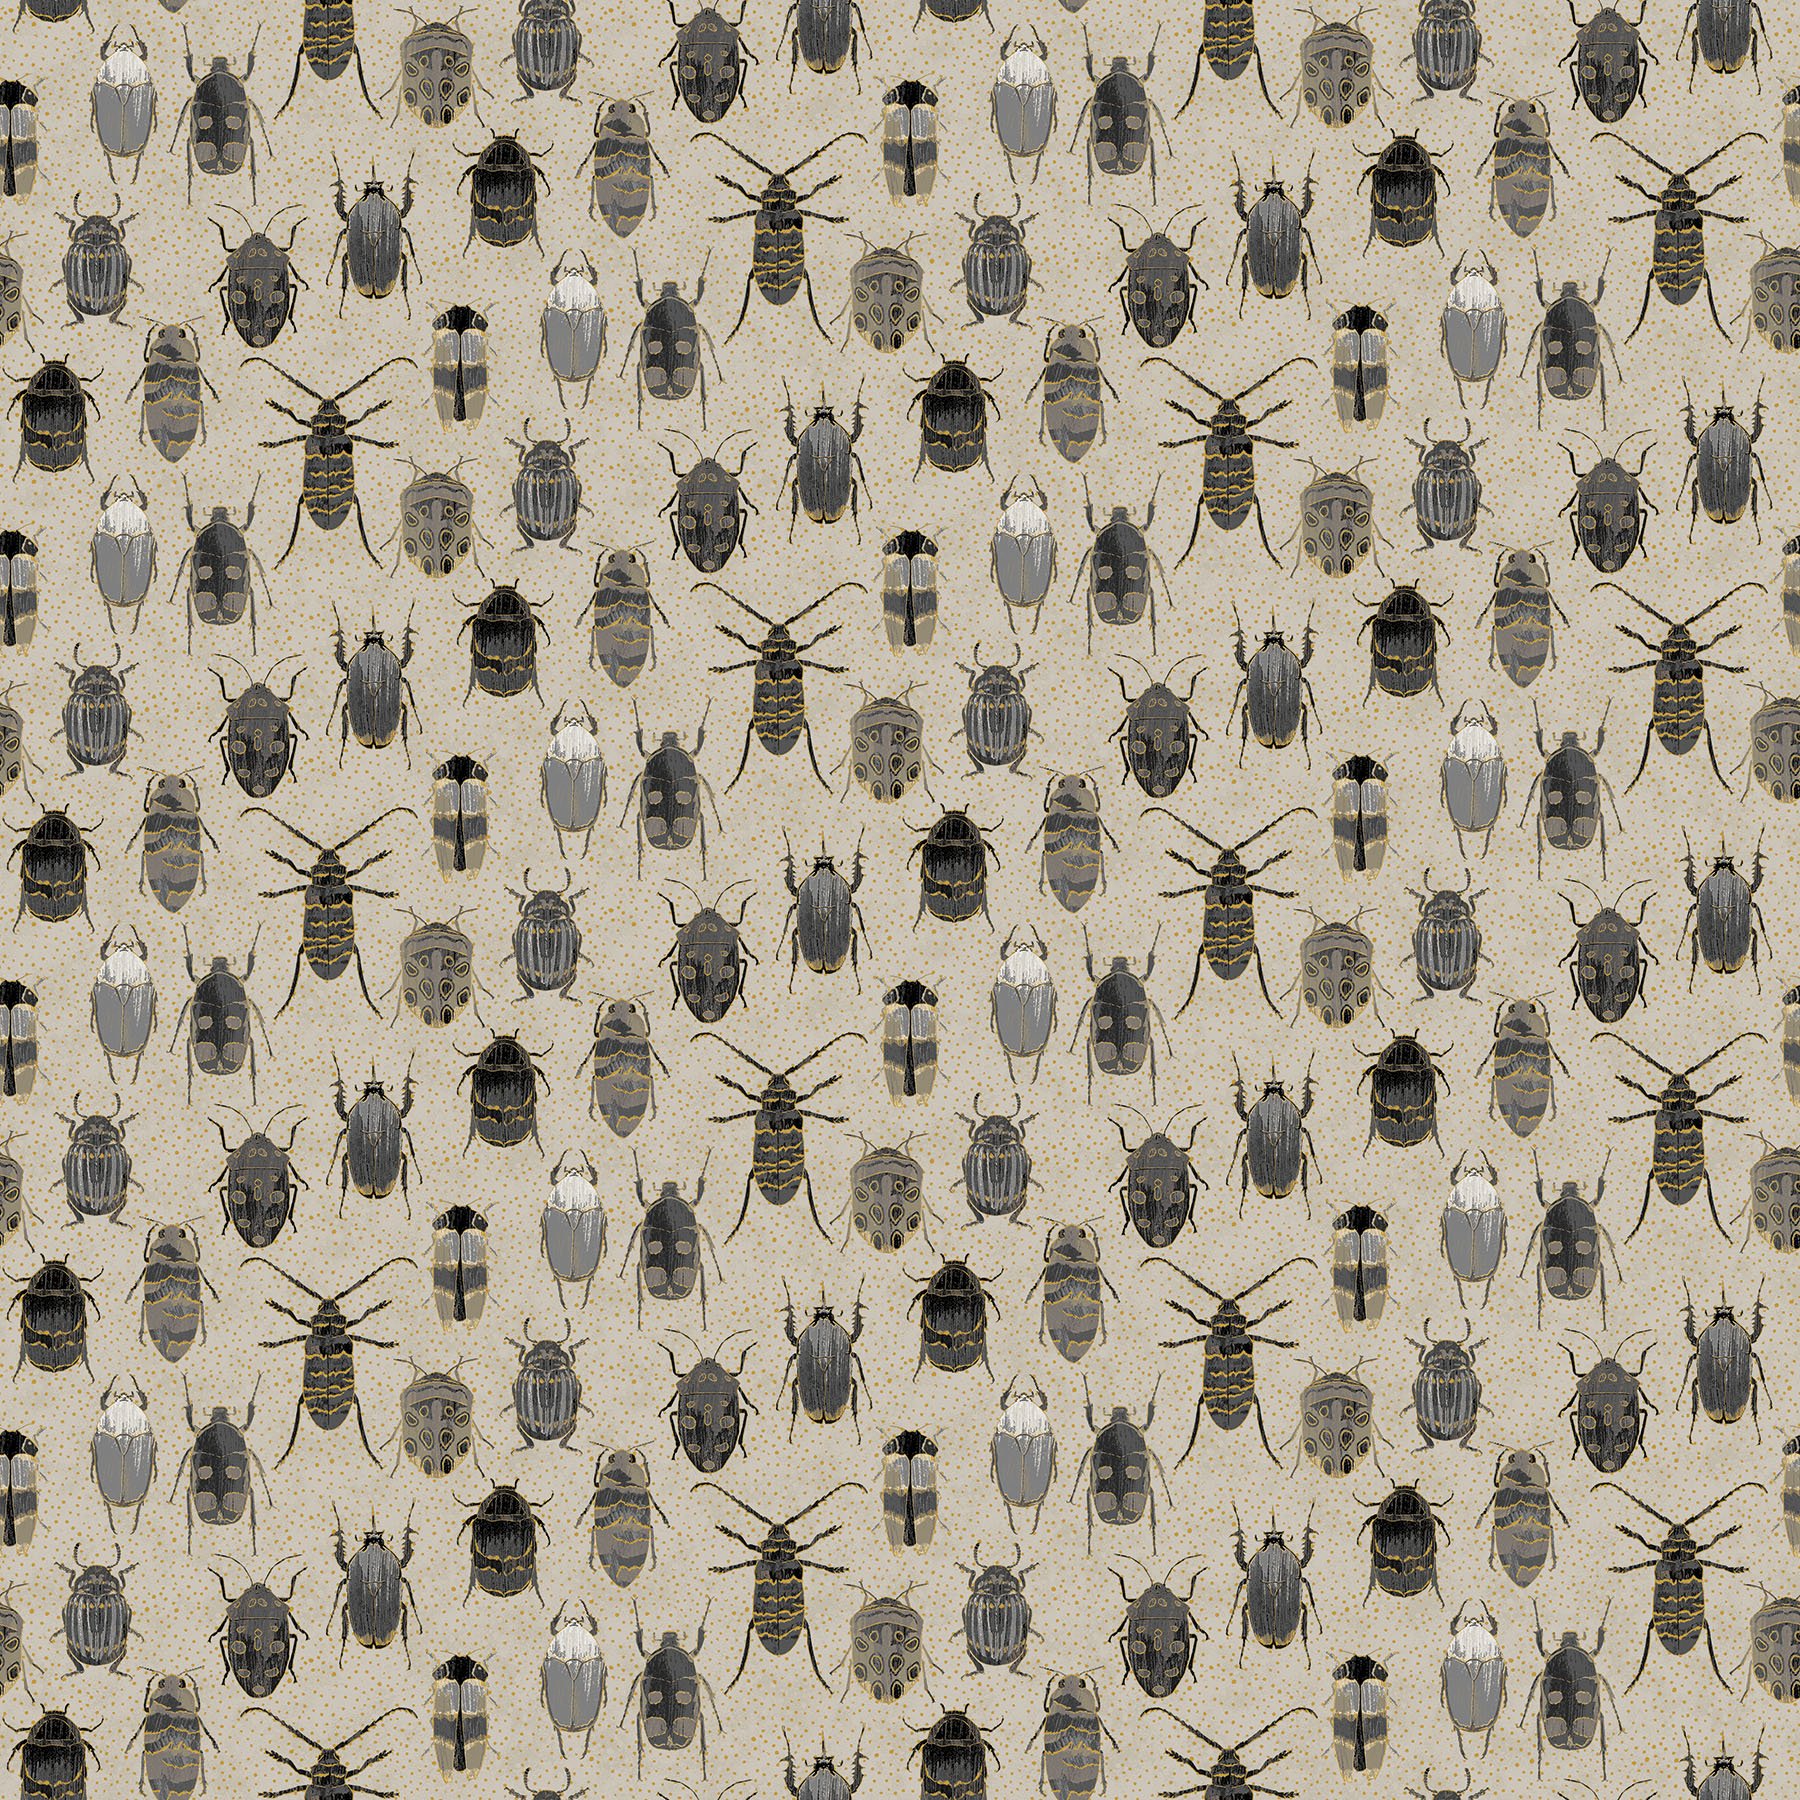 Nocturnal Bliss Fantasia Cotton Fabric Bugs by Northcott 22959M-93